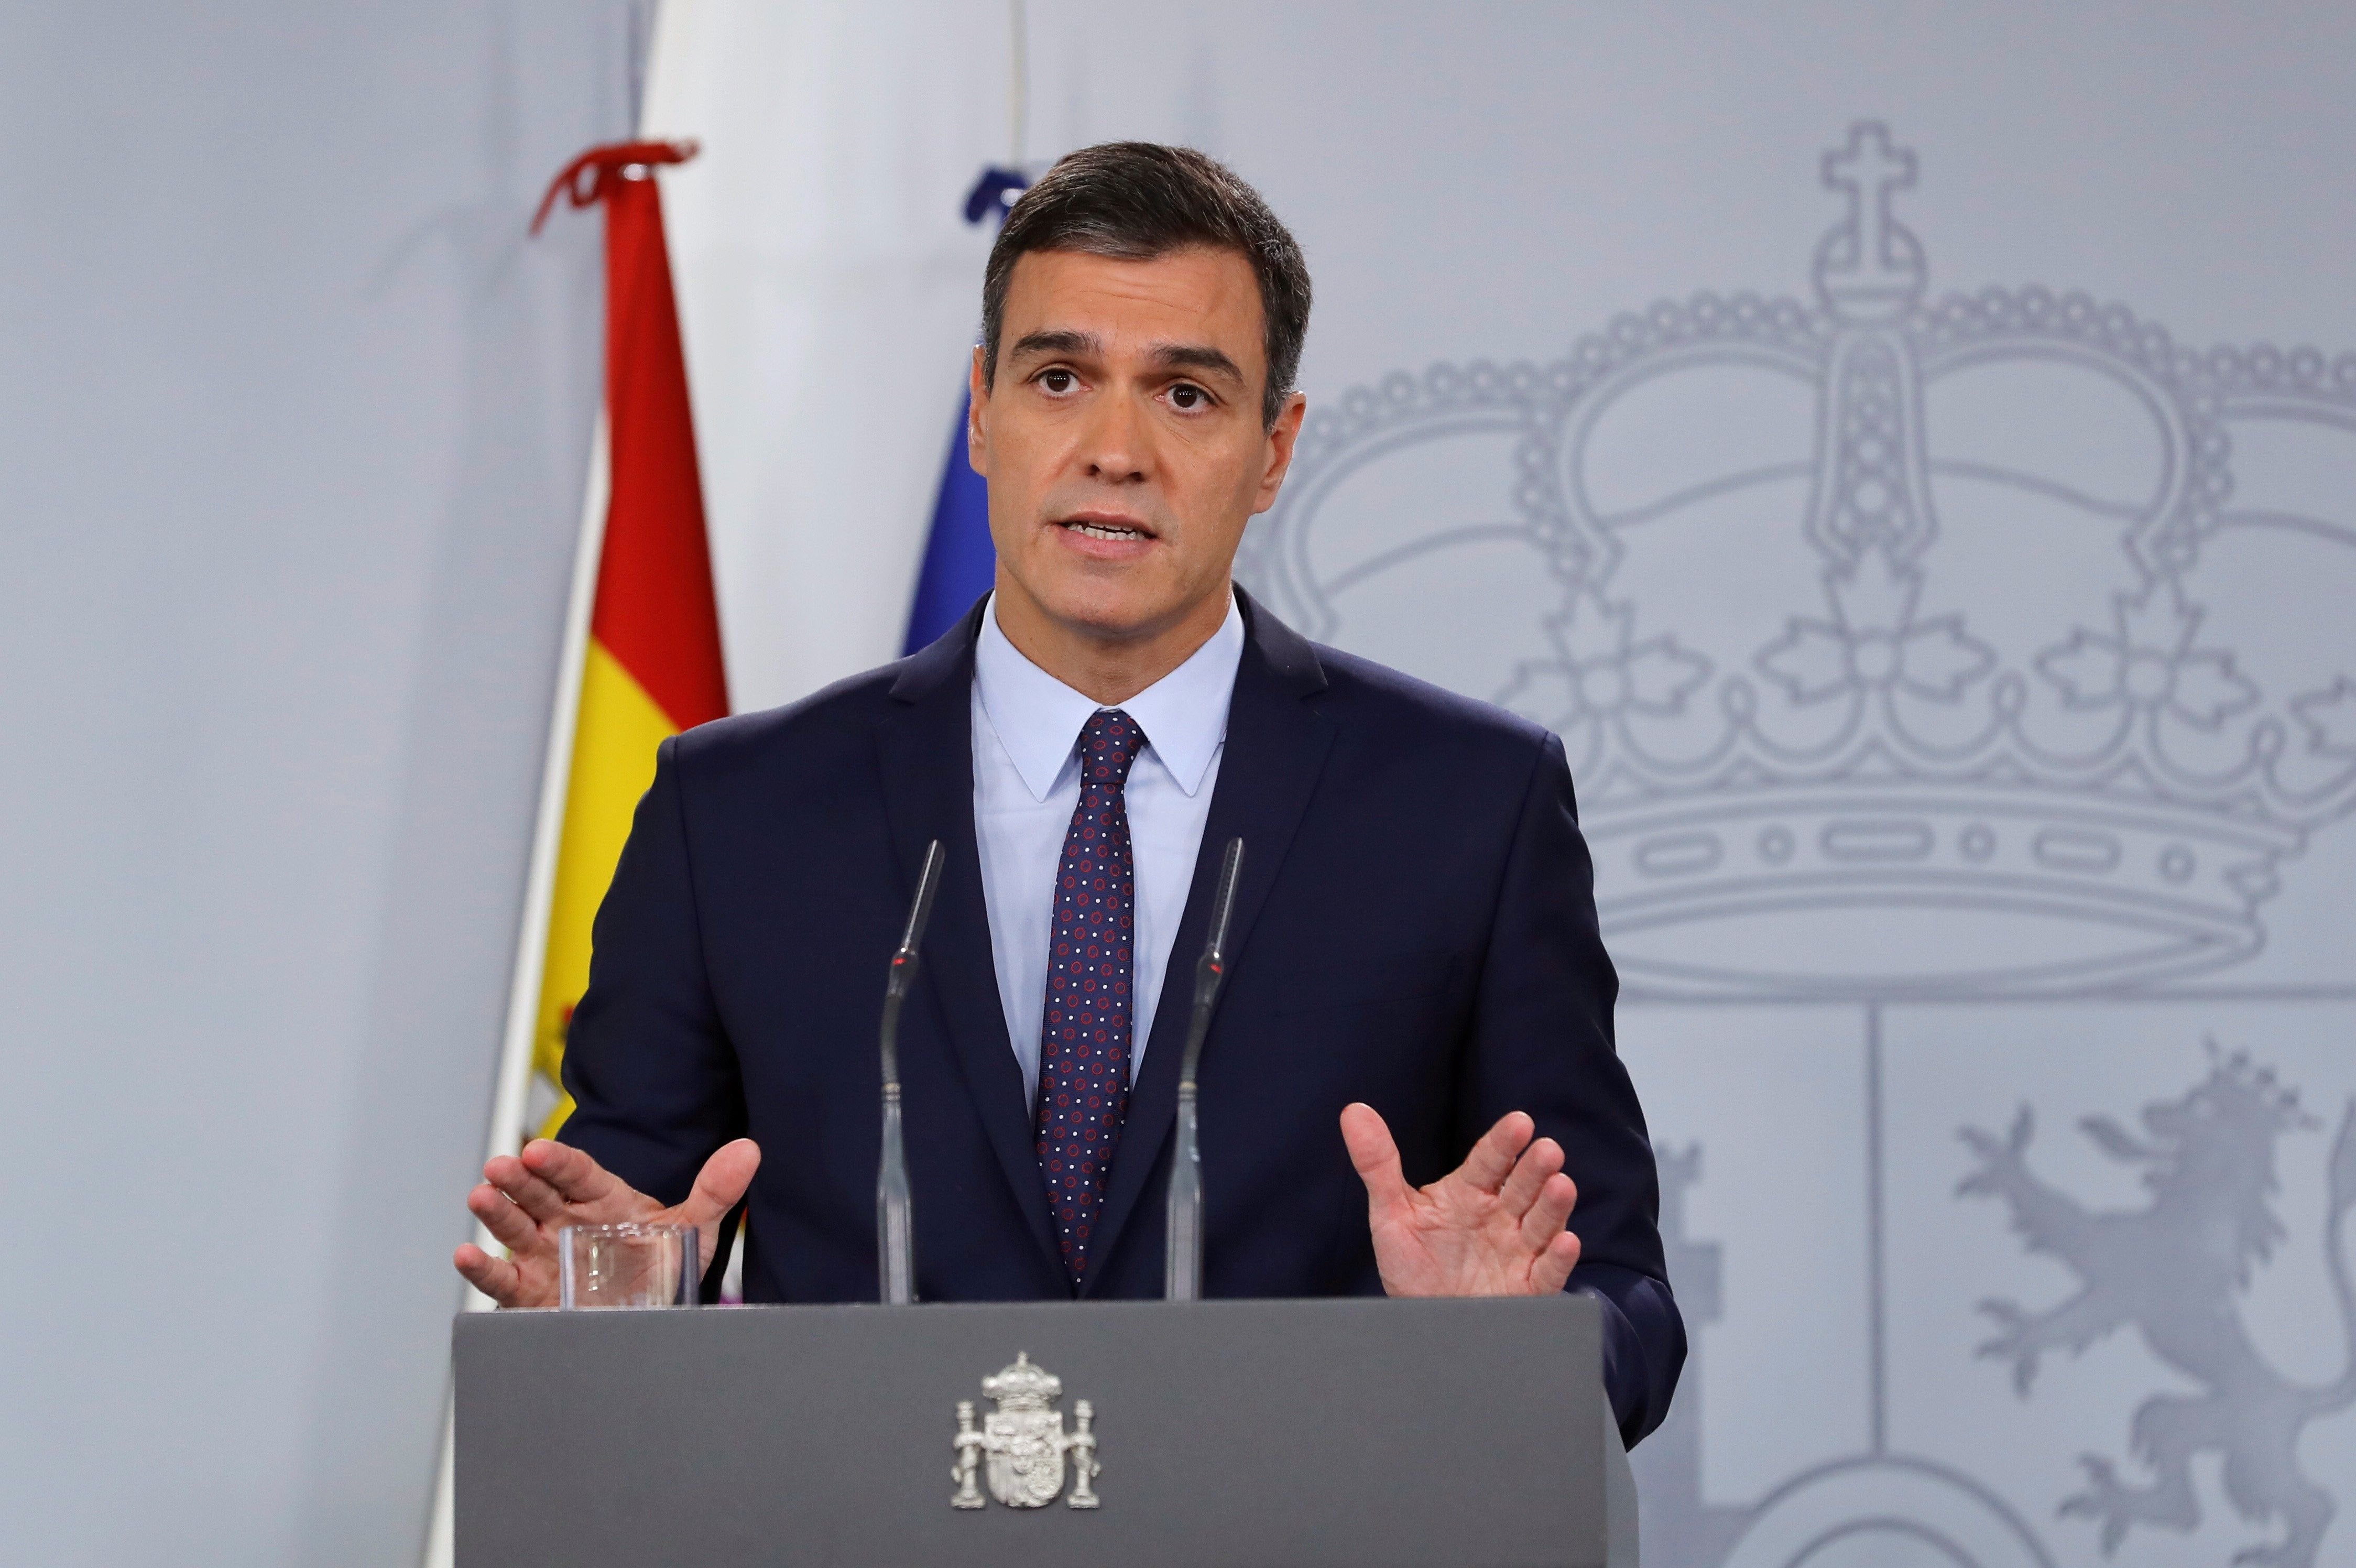 Spanish government on Catalonia: "We're not faced with a peaceful movement"